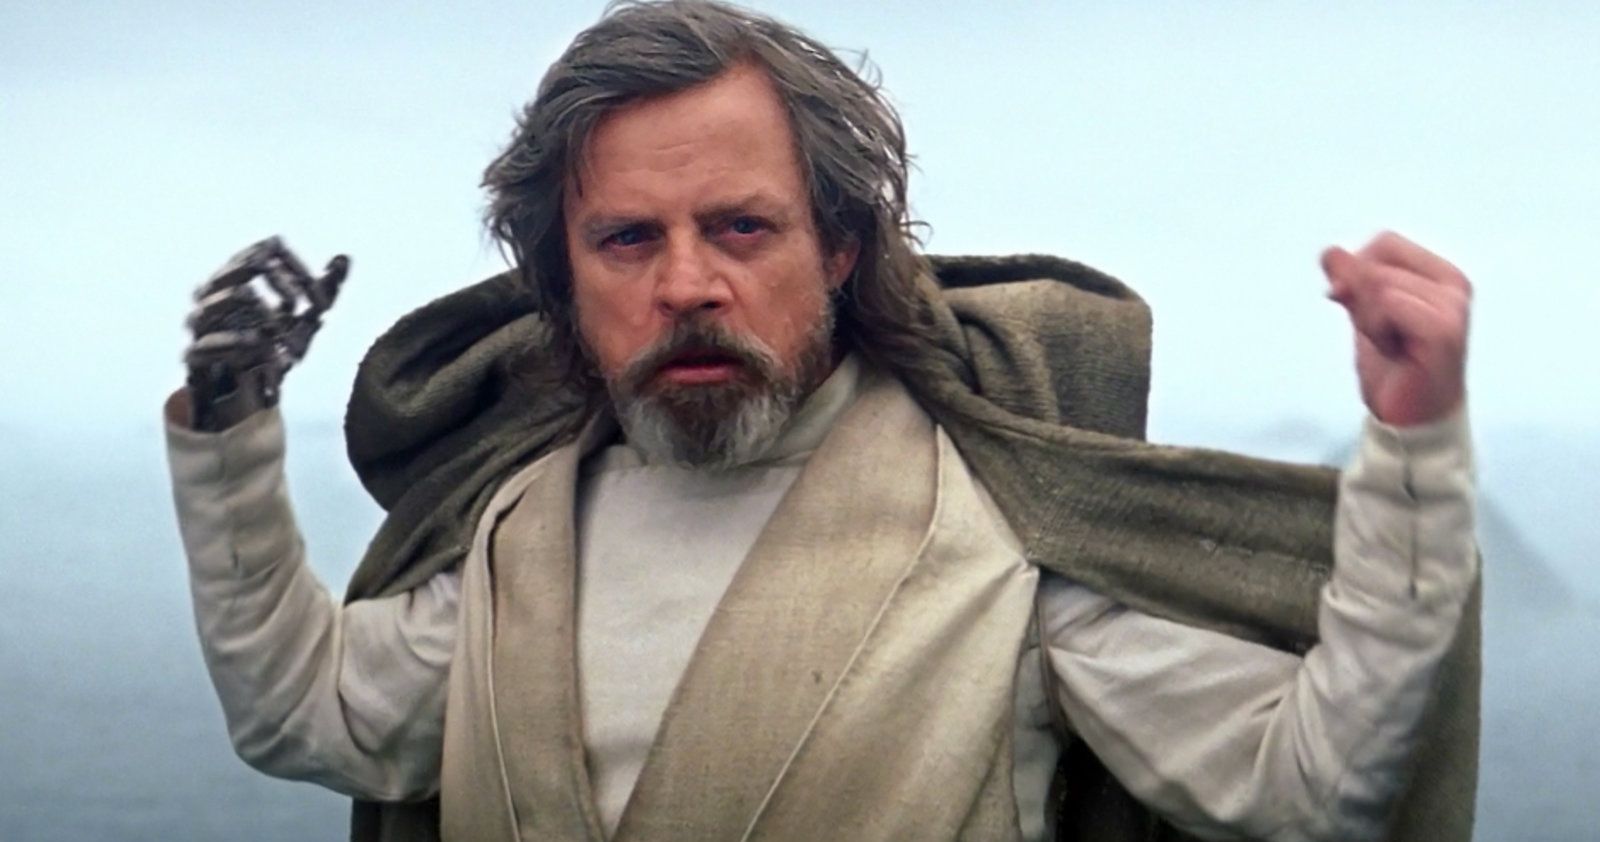 Star Wars Legend Mark Hamill Takes a 'Silent' Jab at His One Scene in The Force Awakens